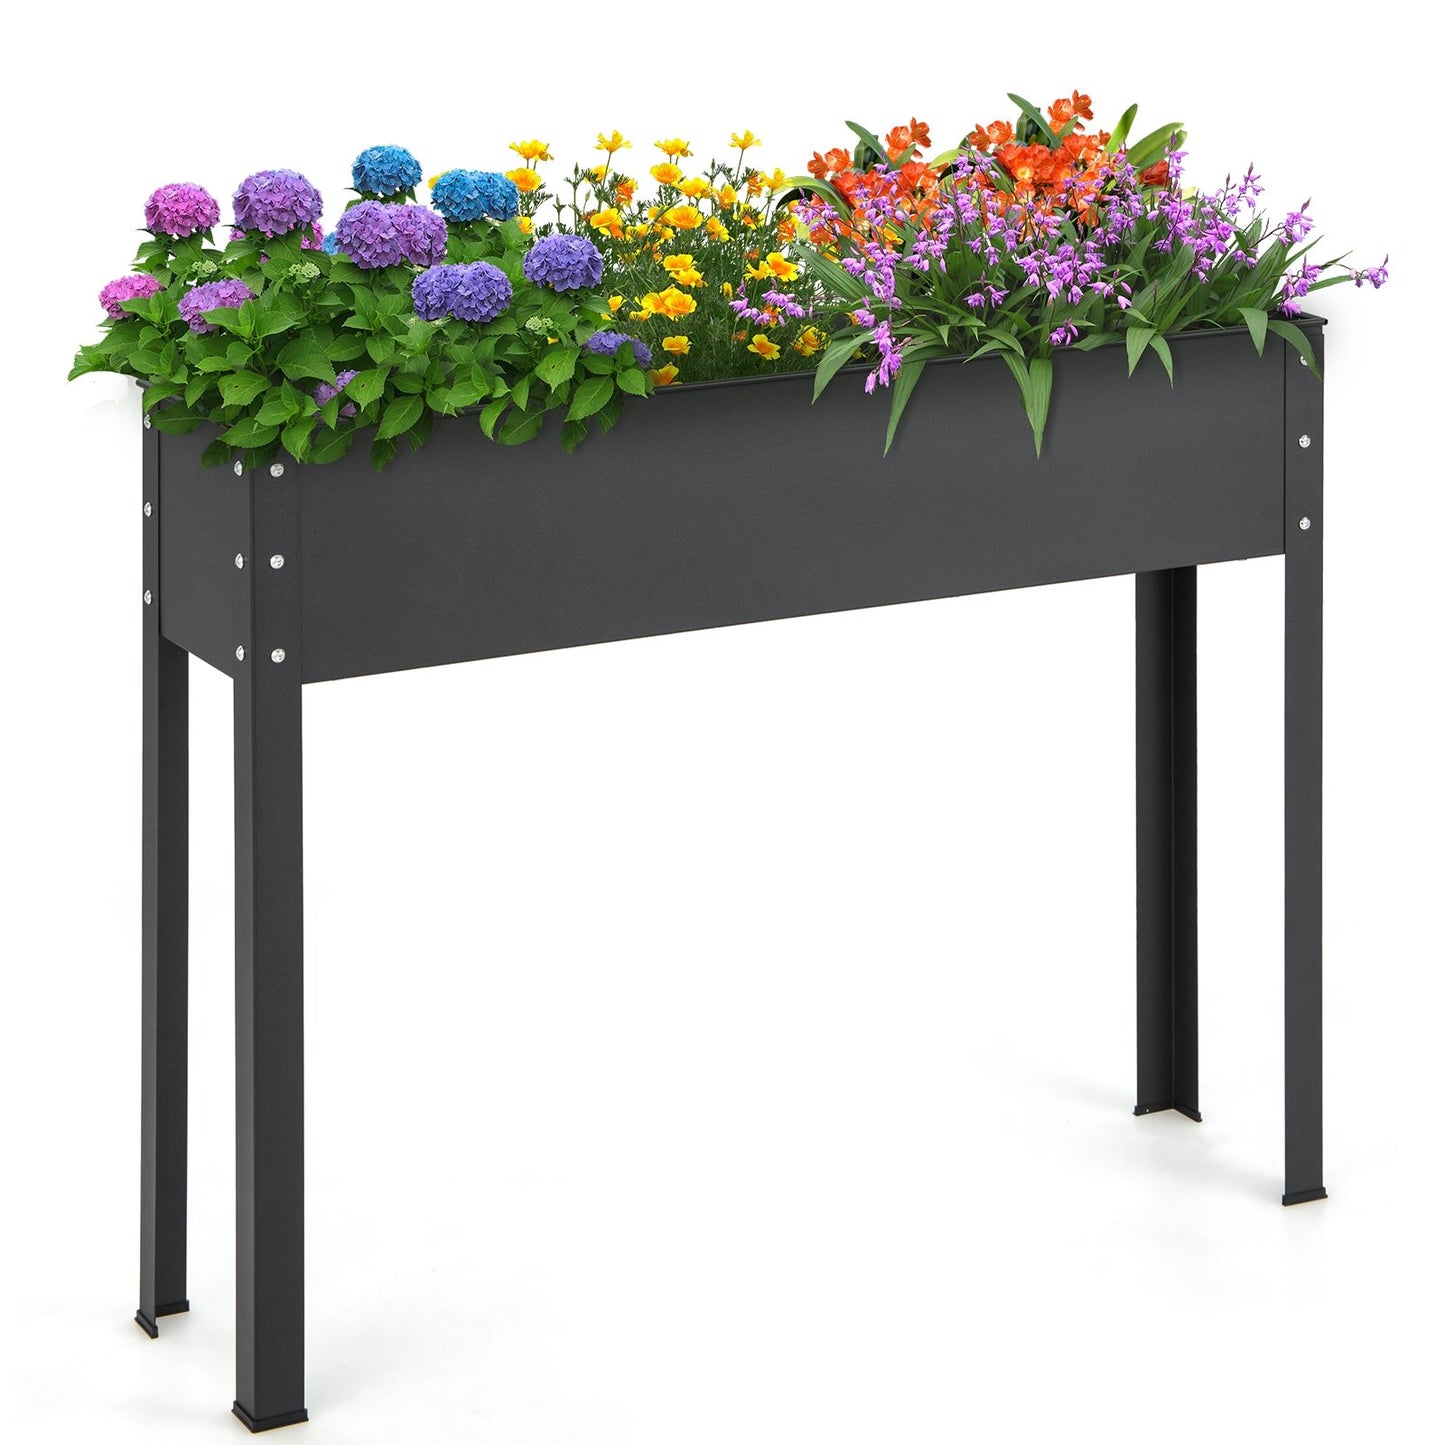 Metal Raised Garden Bed with Legs and Drainage Hole for Vegetable Flower-40 x 11 x 31.5 inches, Black